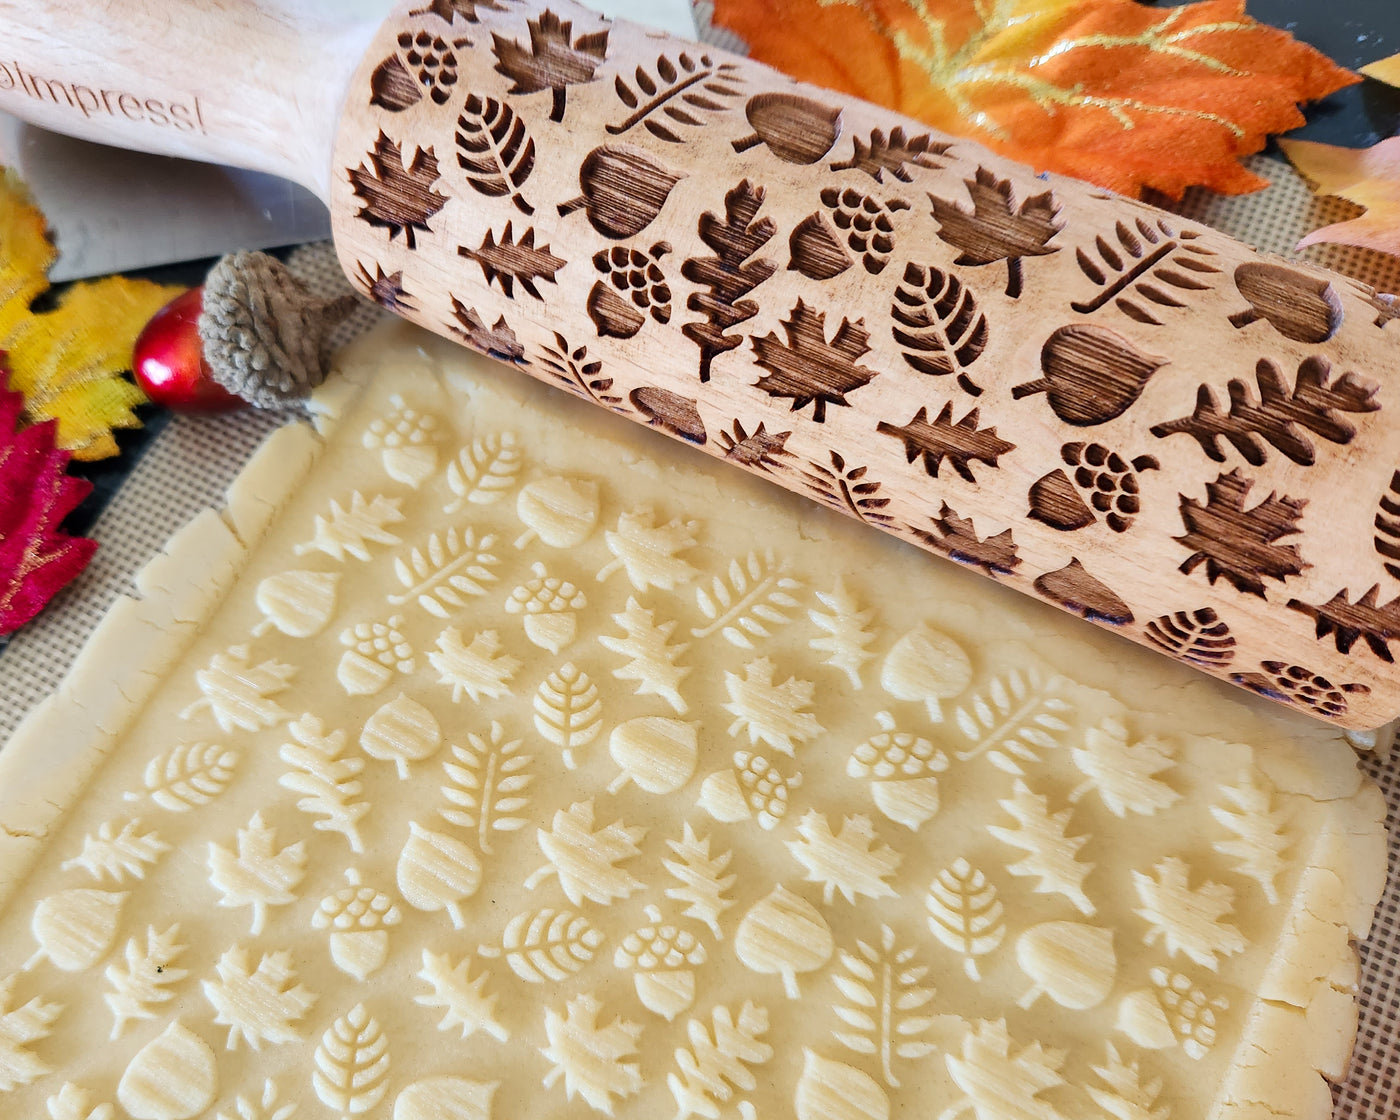 No. R256 FLOWERS & LEAVES - Rolling Pin, Embossed rolling pin